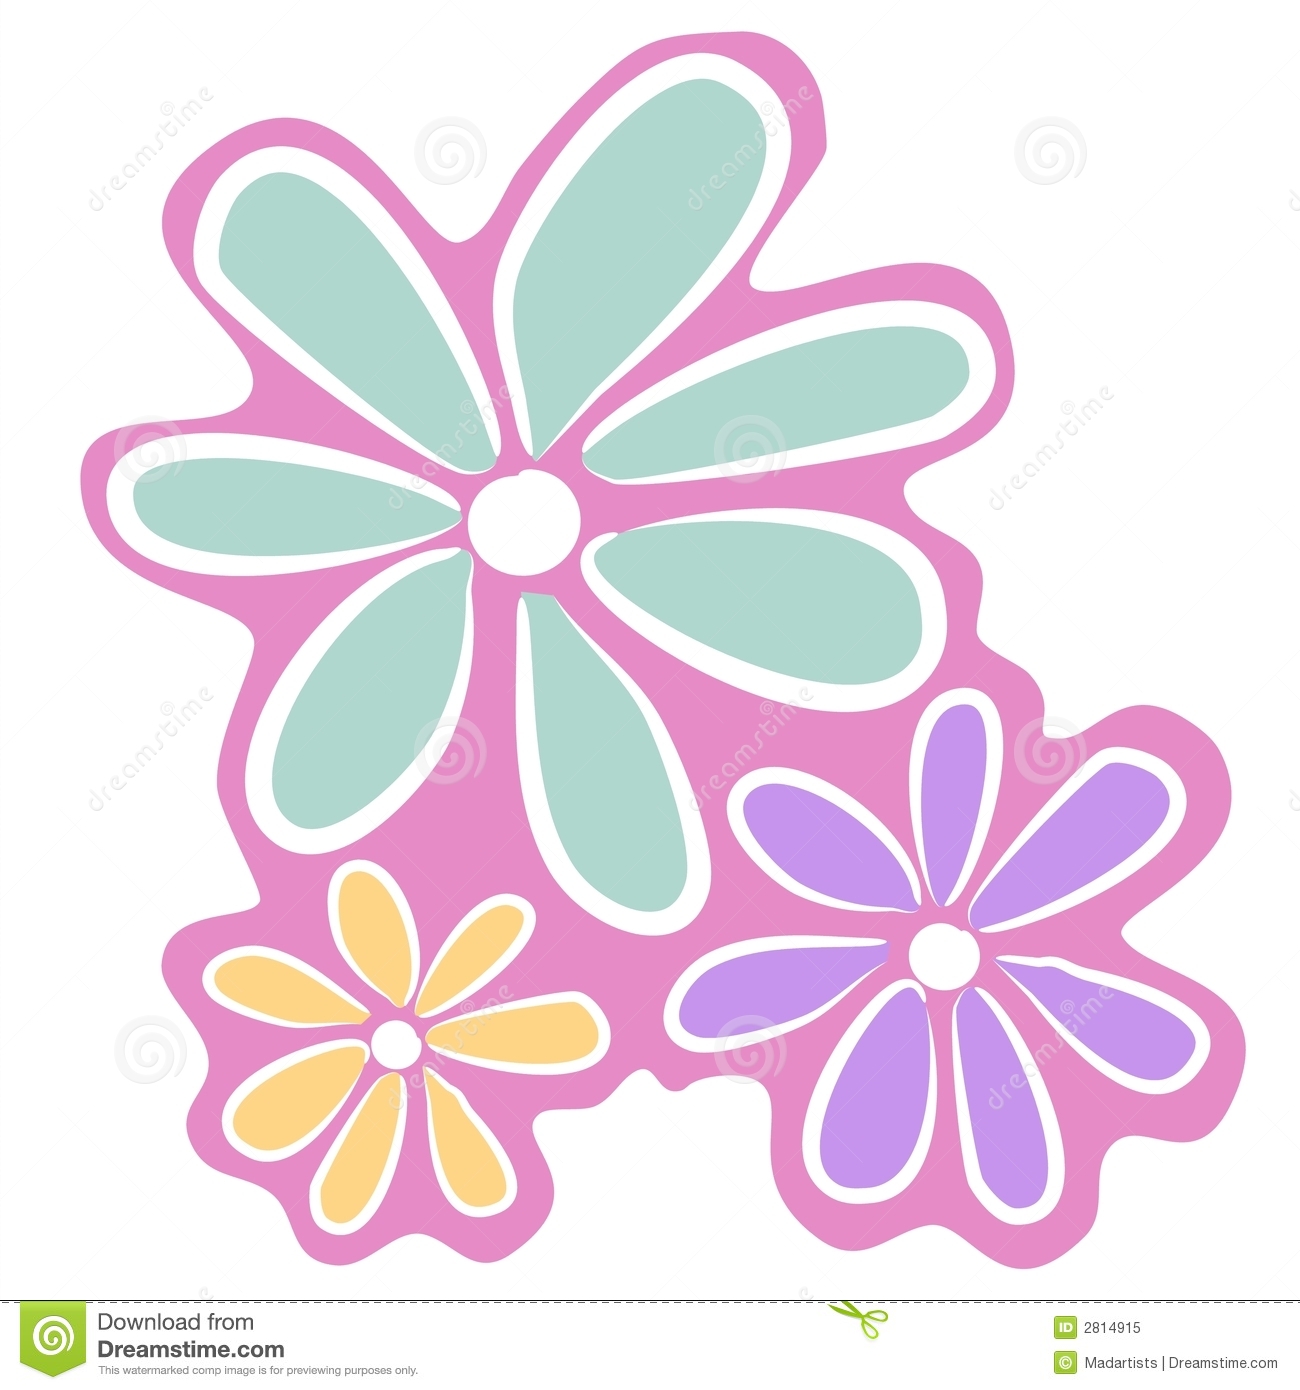 Abstract Retro Flowers Clipart Royalty Free Stock Photos.